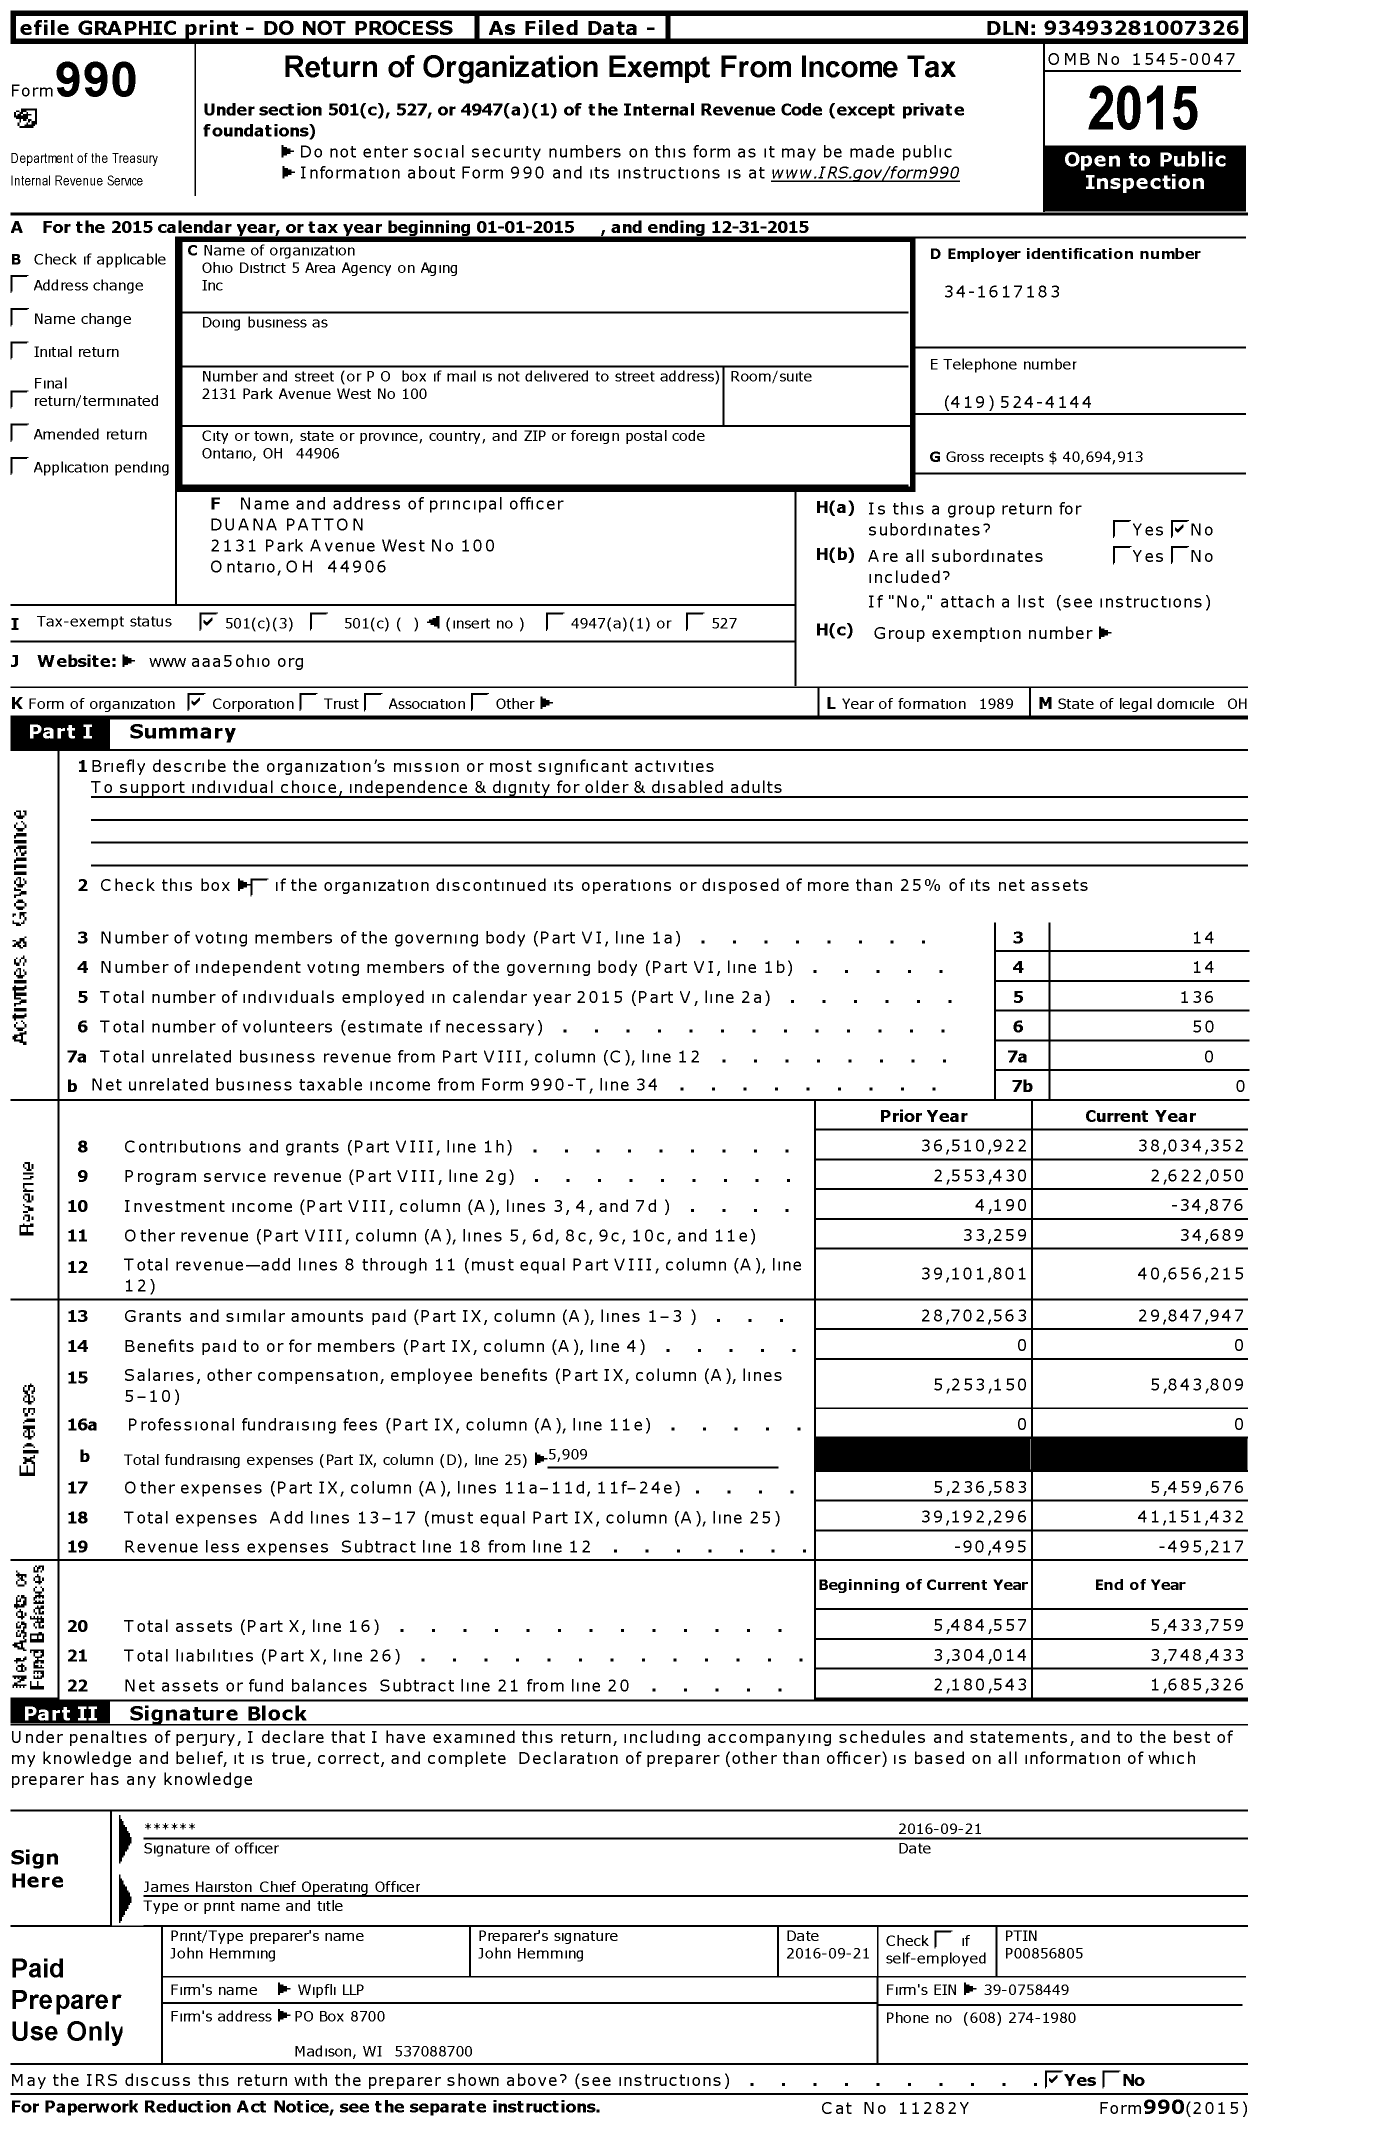 Image of first page of 2015 Form 990 for Ohio District 5 Area Agency on Aging